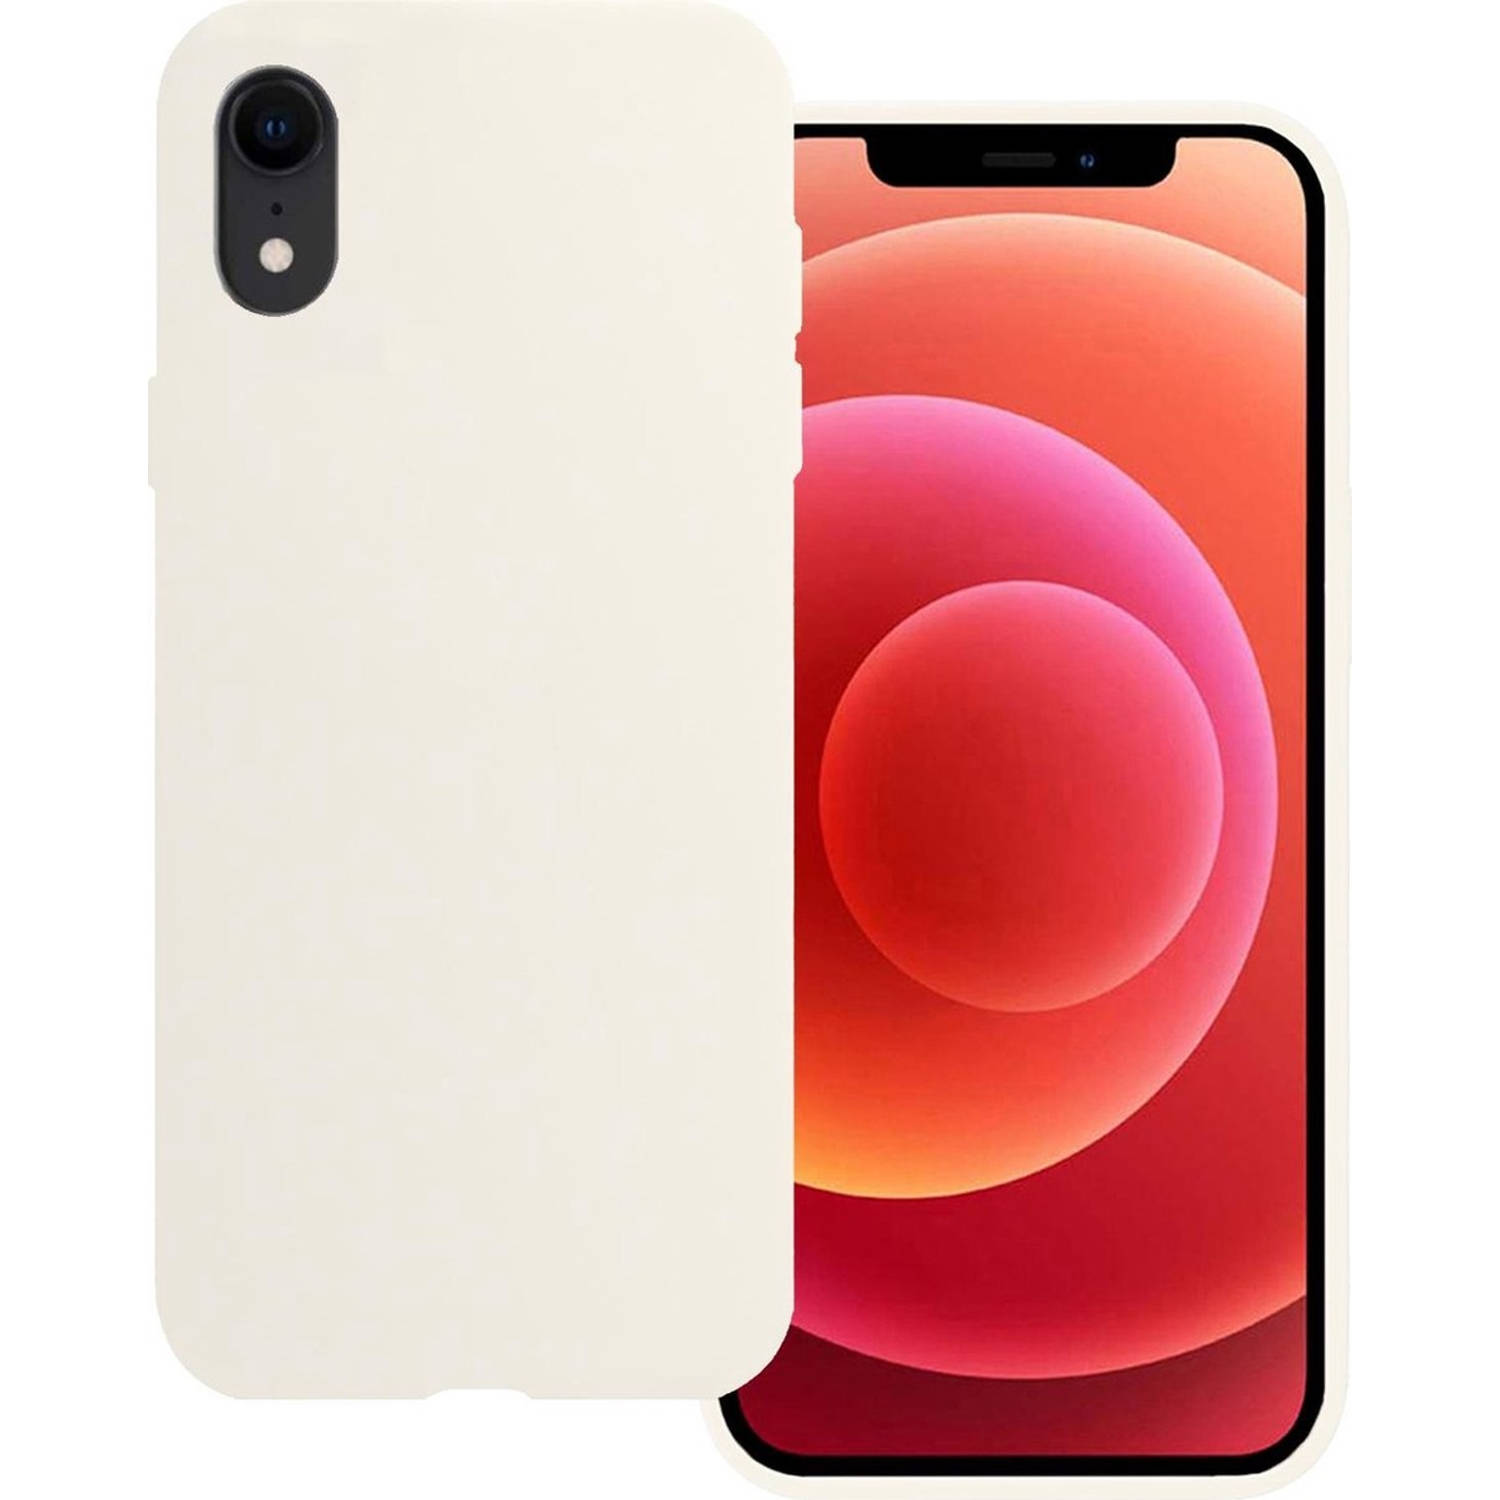 Basey Apple Iphone Xr Hoesje Siliconen Hoes Case Cover Apple Iphone Xr-wit